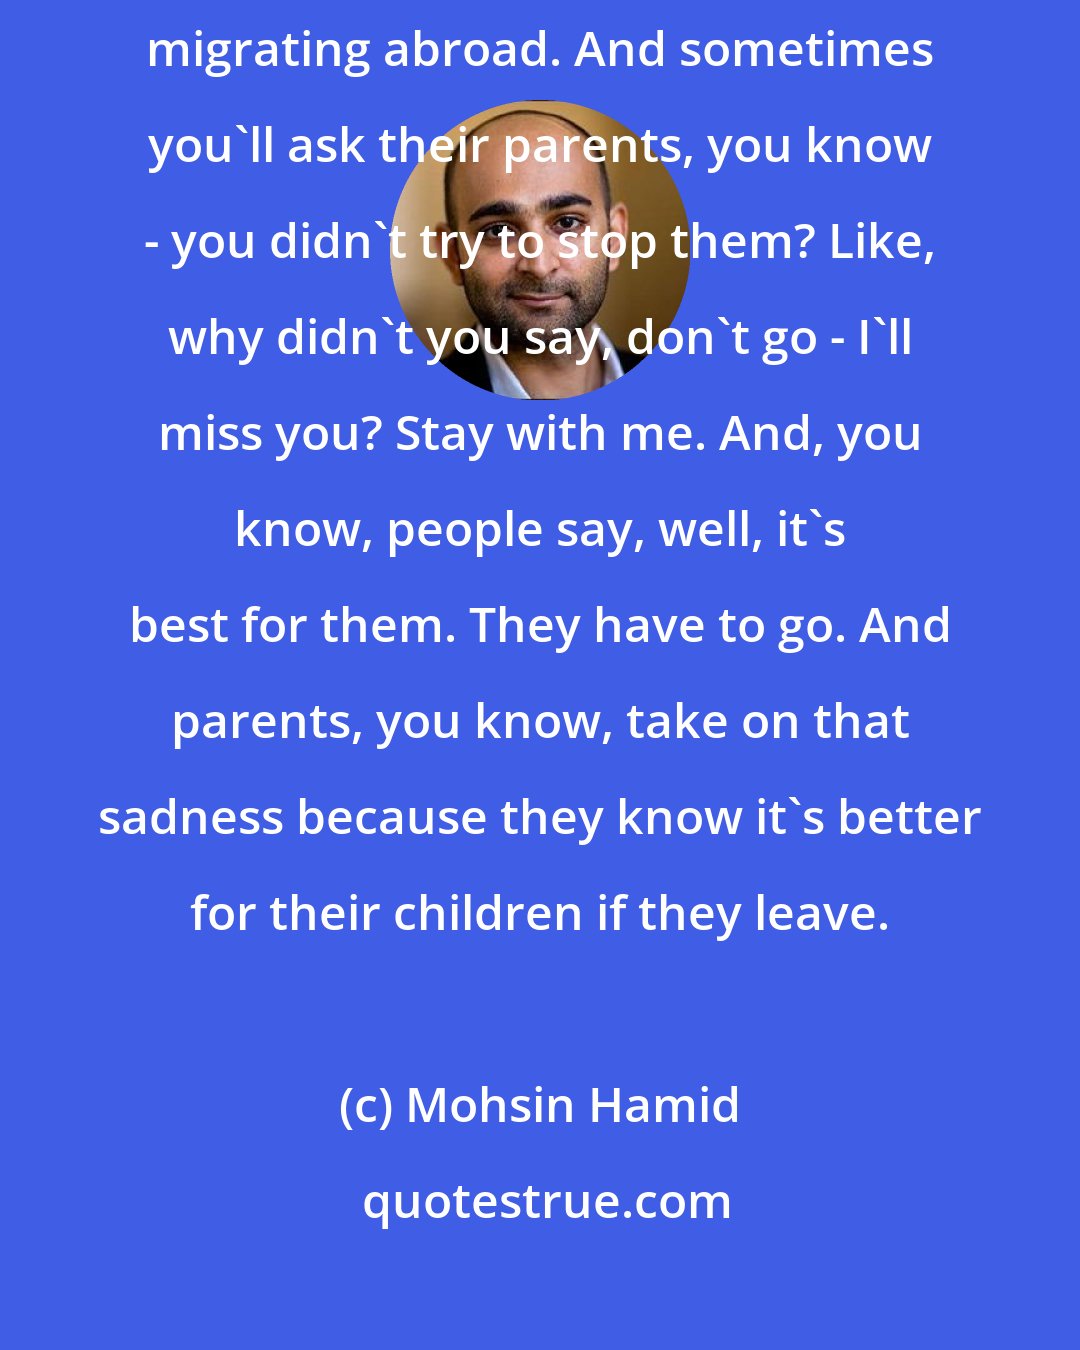 Mohsin Hamid: Living in a place like Pakistan, very often you meet people who are migrating abroad. And sometimes you'll ask their parents, you know - you didn't try to stop them? Like, why didn't you say, don't go - I'll miss you? Stay with me. And, you know, people say, well, it's best for them. They have to go. And parents, you know, take on that sadness because they know it's better for their children if they leave.